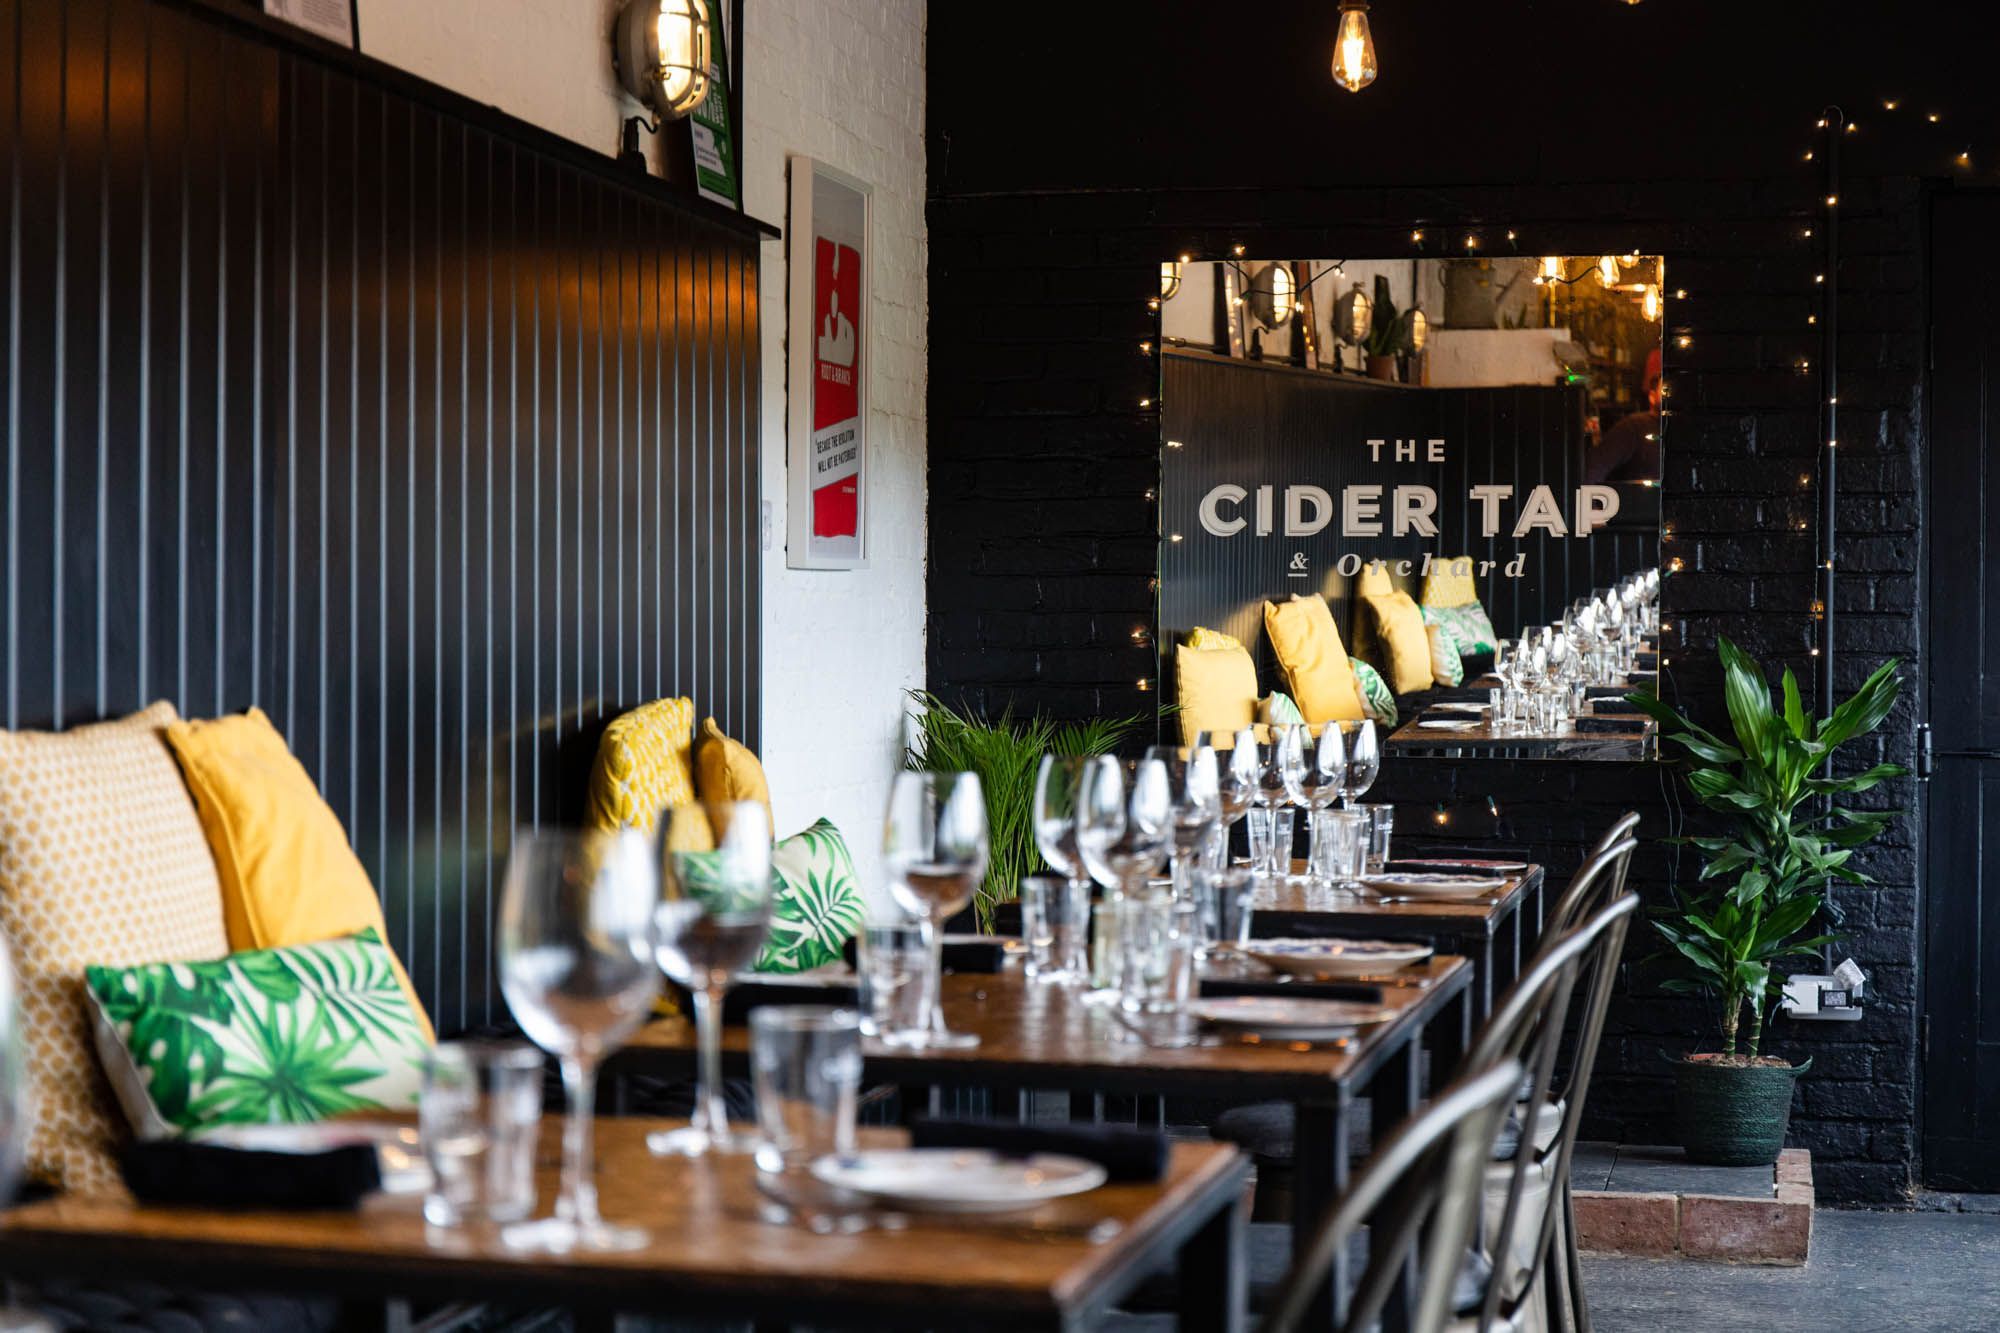 Interior of The Cider Tap, black and white walls, brown tables laid out with glasses for drinks, black chairs and yellow pillows